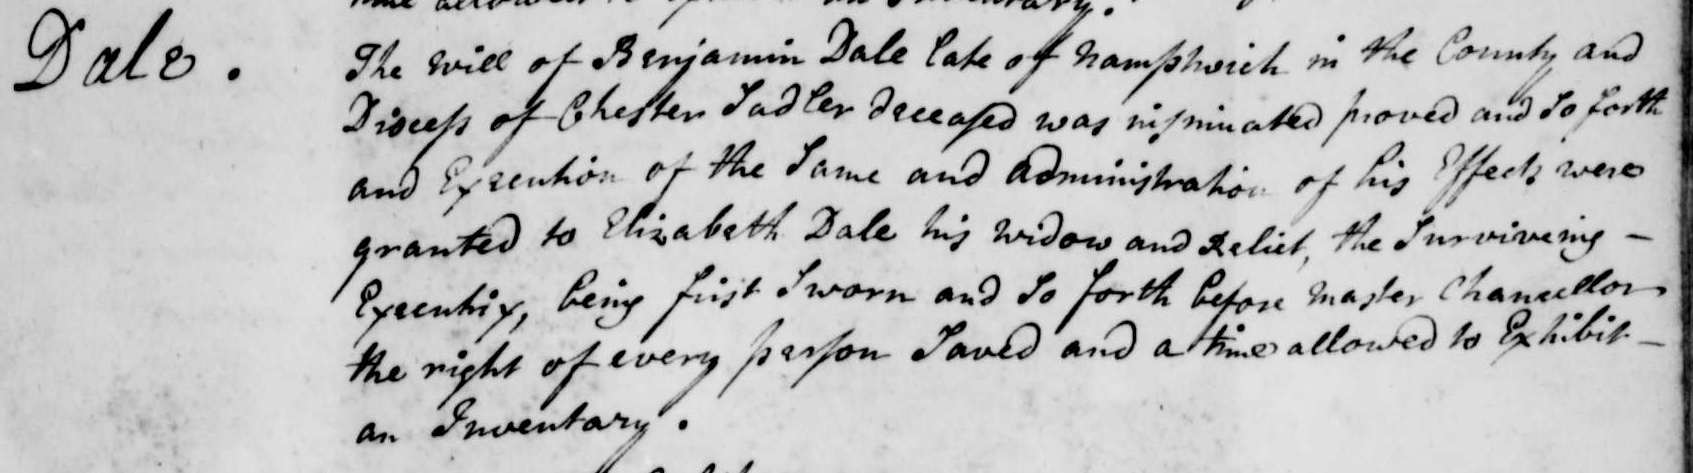 Taken on August 7th, 1733 in Nantwich and sourced from Wills - Cheshire.